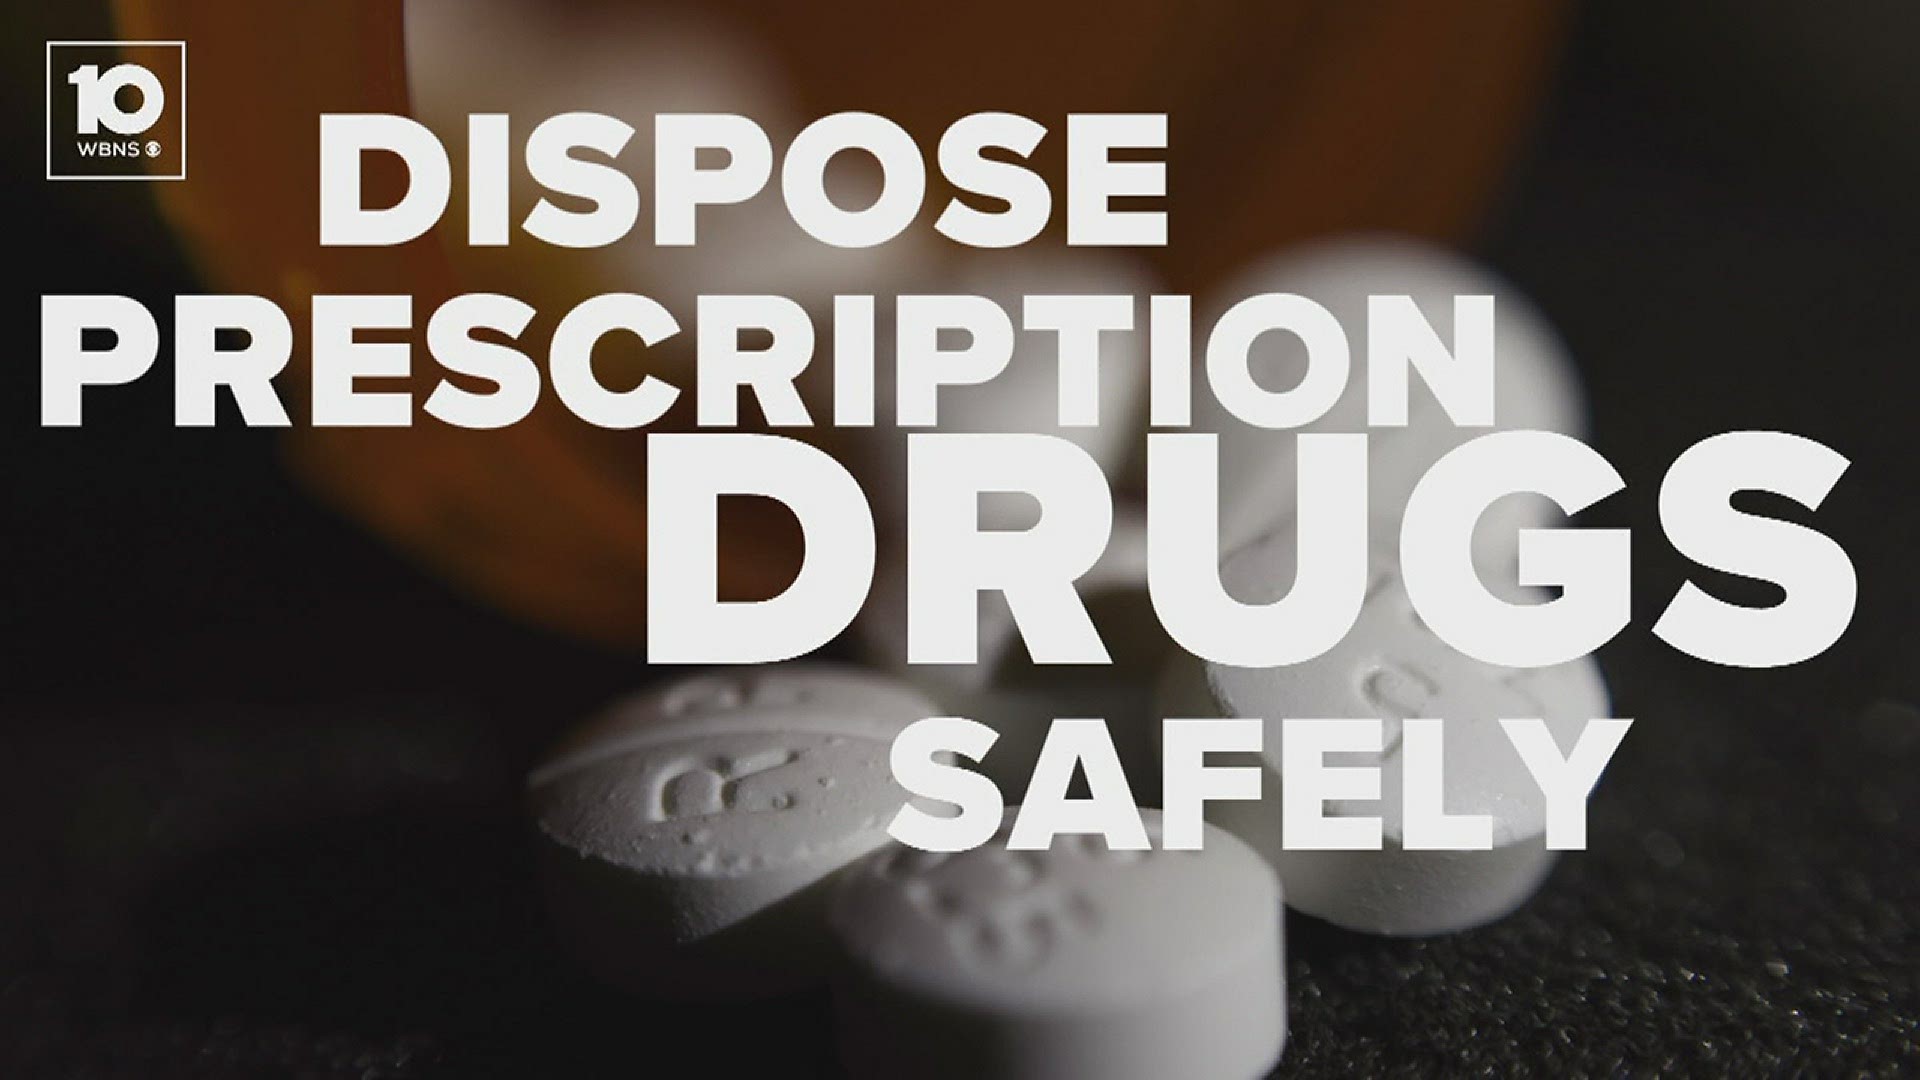 The day is an opportunity to safely dispose of your prescription medications to help prevent drug addiction and overdose deaths.